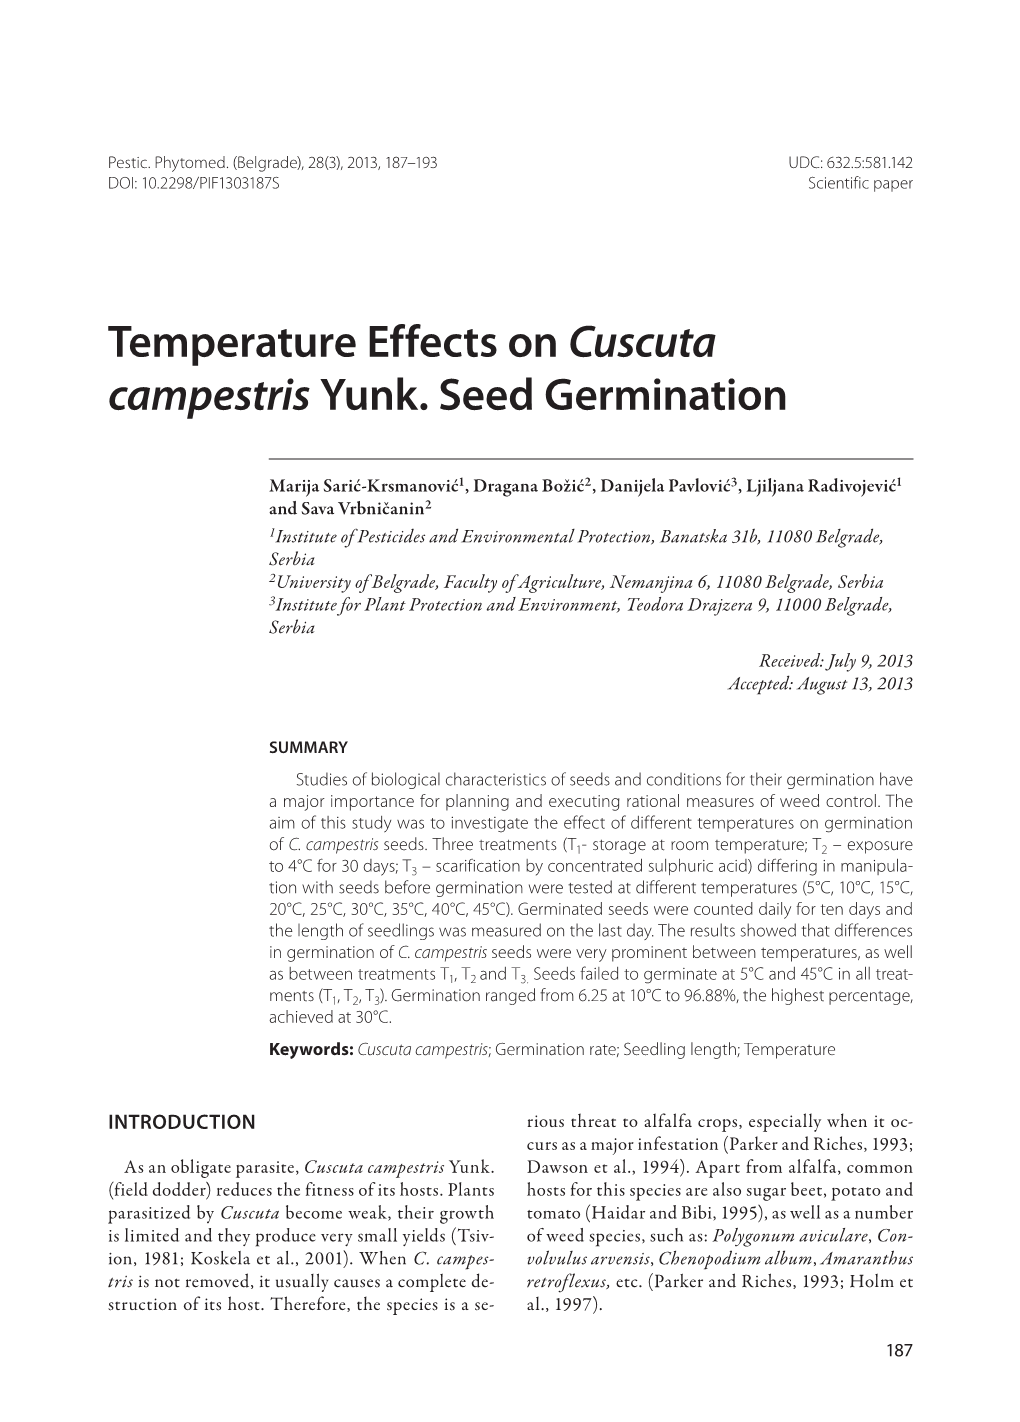 Temperature Effects on Cuscuta Campestris Yunk. Seed Germination